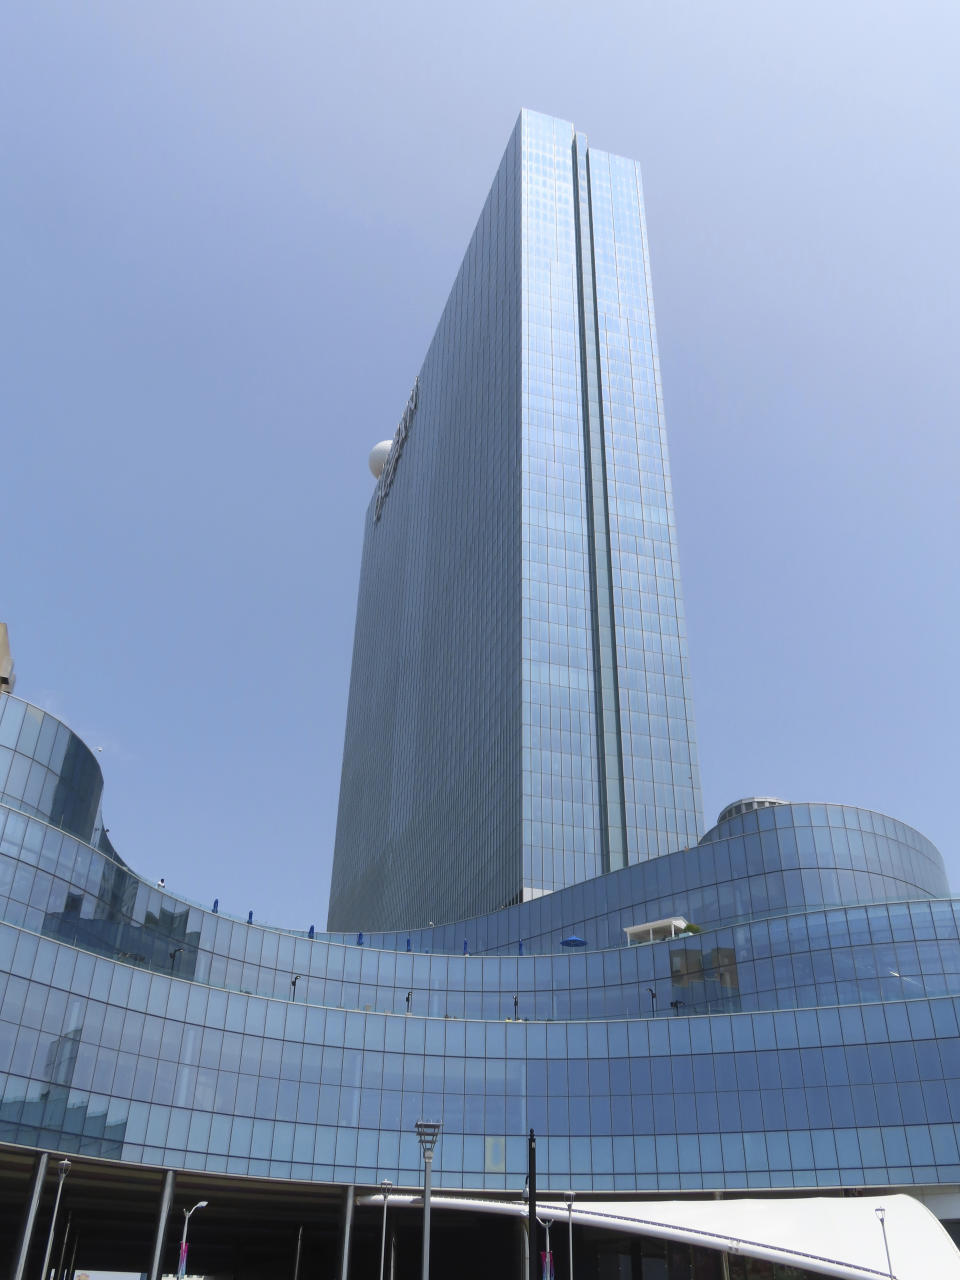 The exterior of the Ocean Casino Resort in Atlantic City, N.J., is shown on June 15, 2023. The city's two newest casinos - Hard Rock and Ocean - which both opened on June 27, 2018, have become the second and third most successful Atlantic City casinos in terms of money won from in-person gamblers. (AP Photo/Wayne Parry)